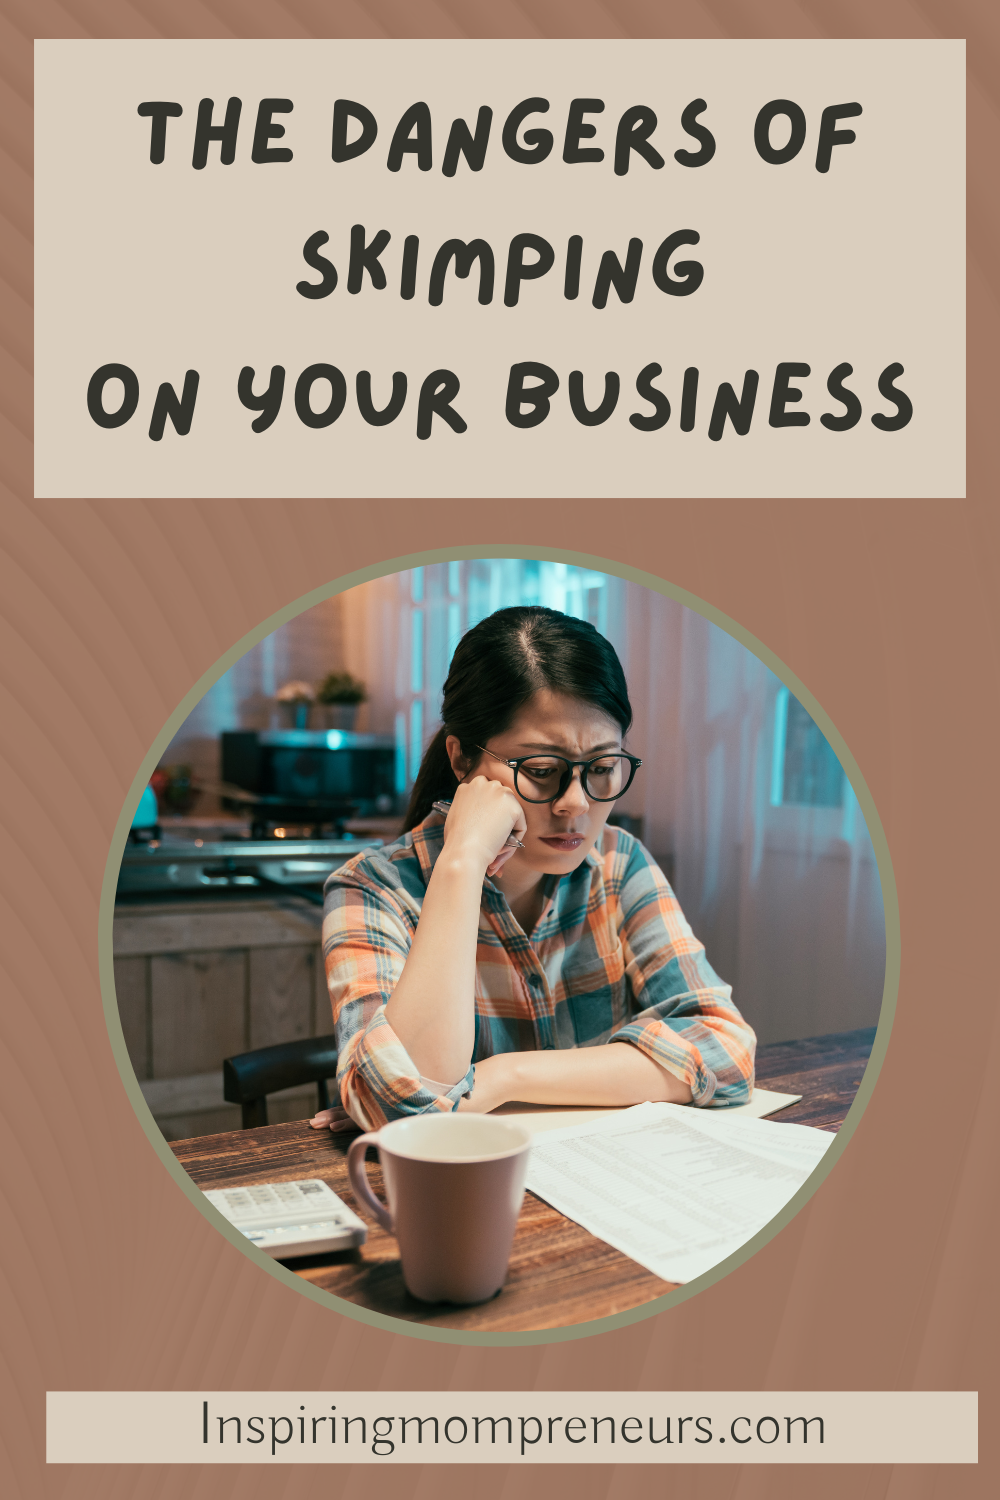 Have you been skimping on your business? Let's take a look at the dangers of skimping on various aspects of business, so that you do not fall into this trap.